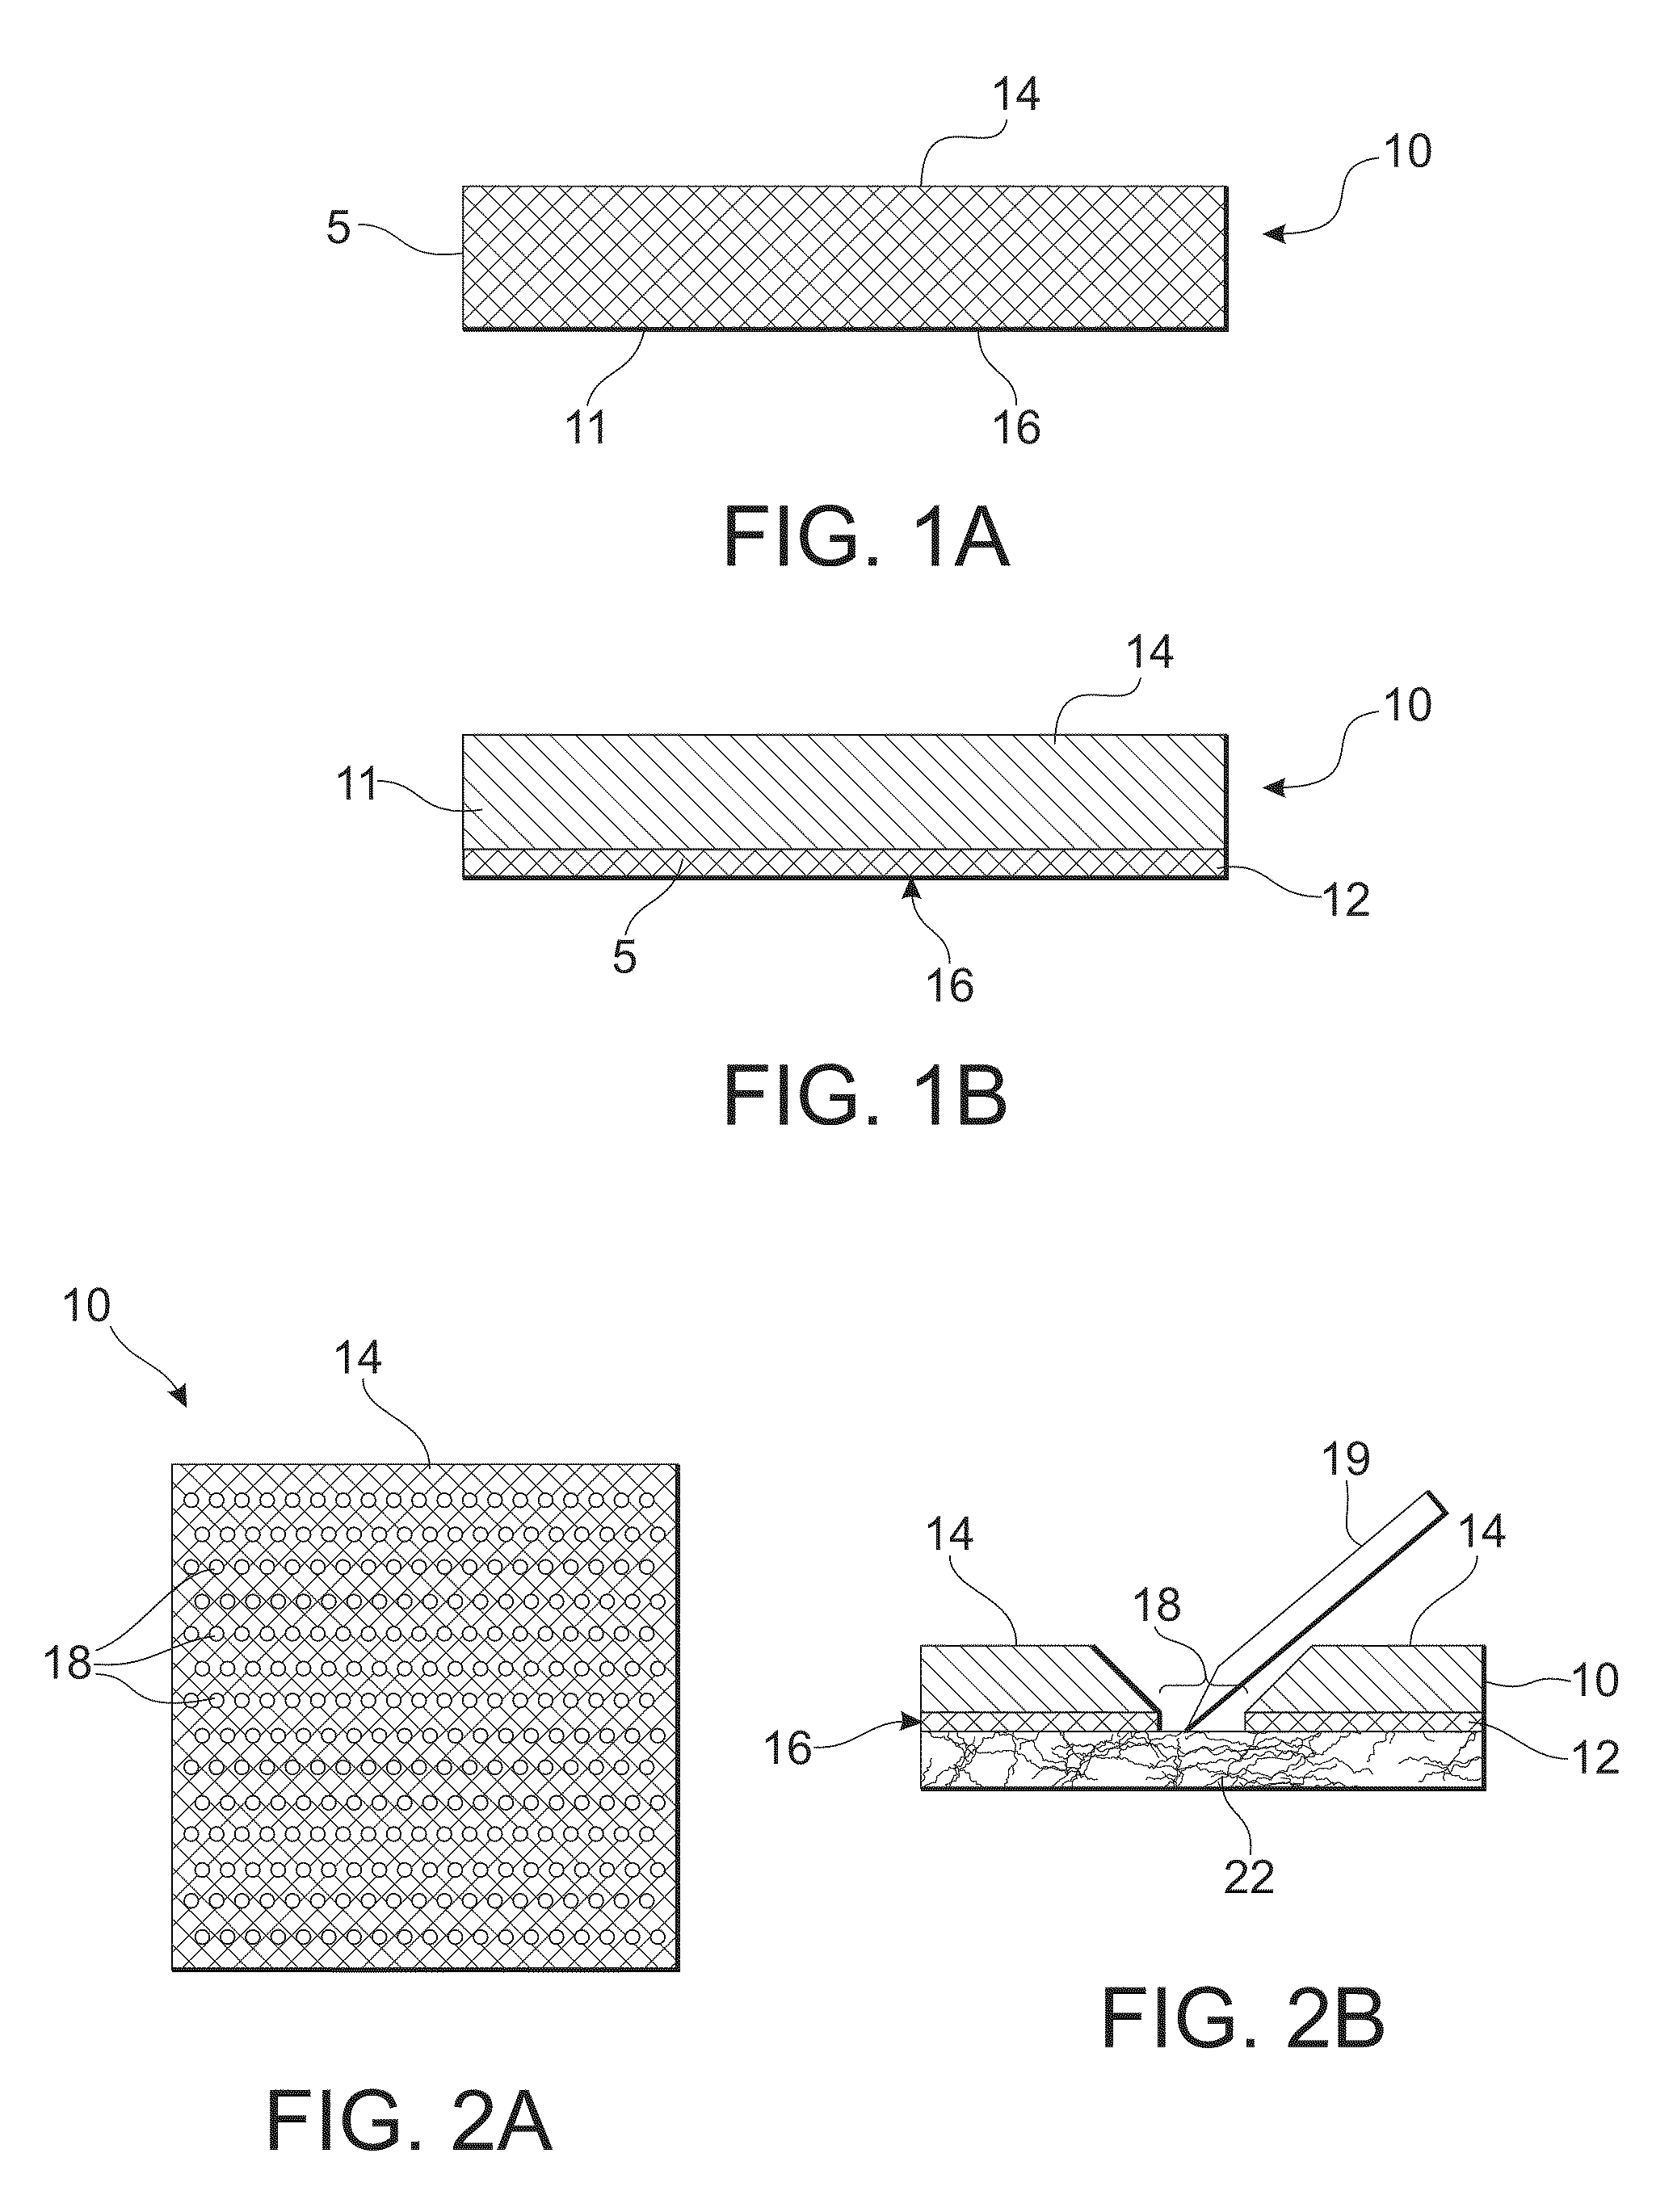 Self-cooling gel substrate for temperature differentiated imaging